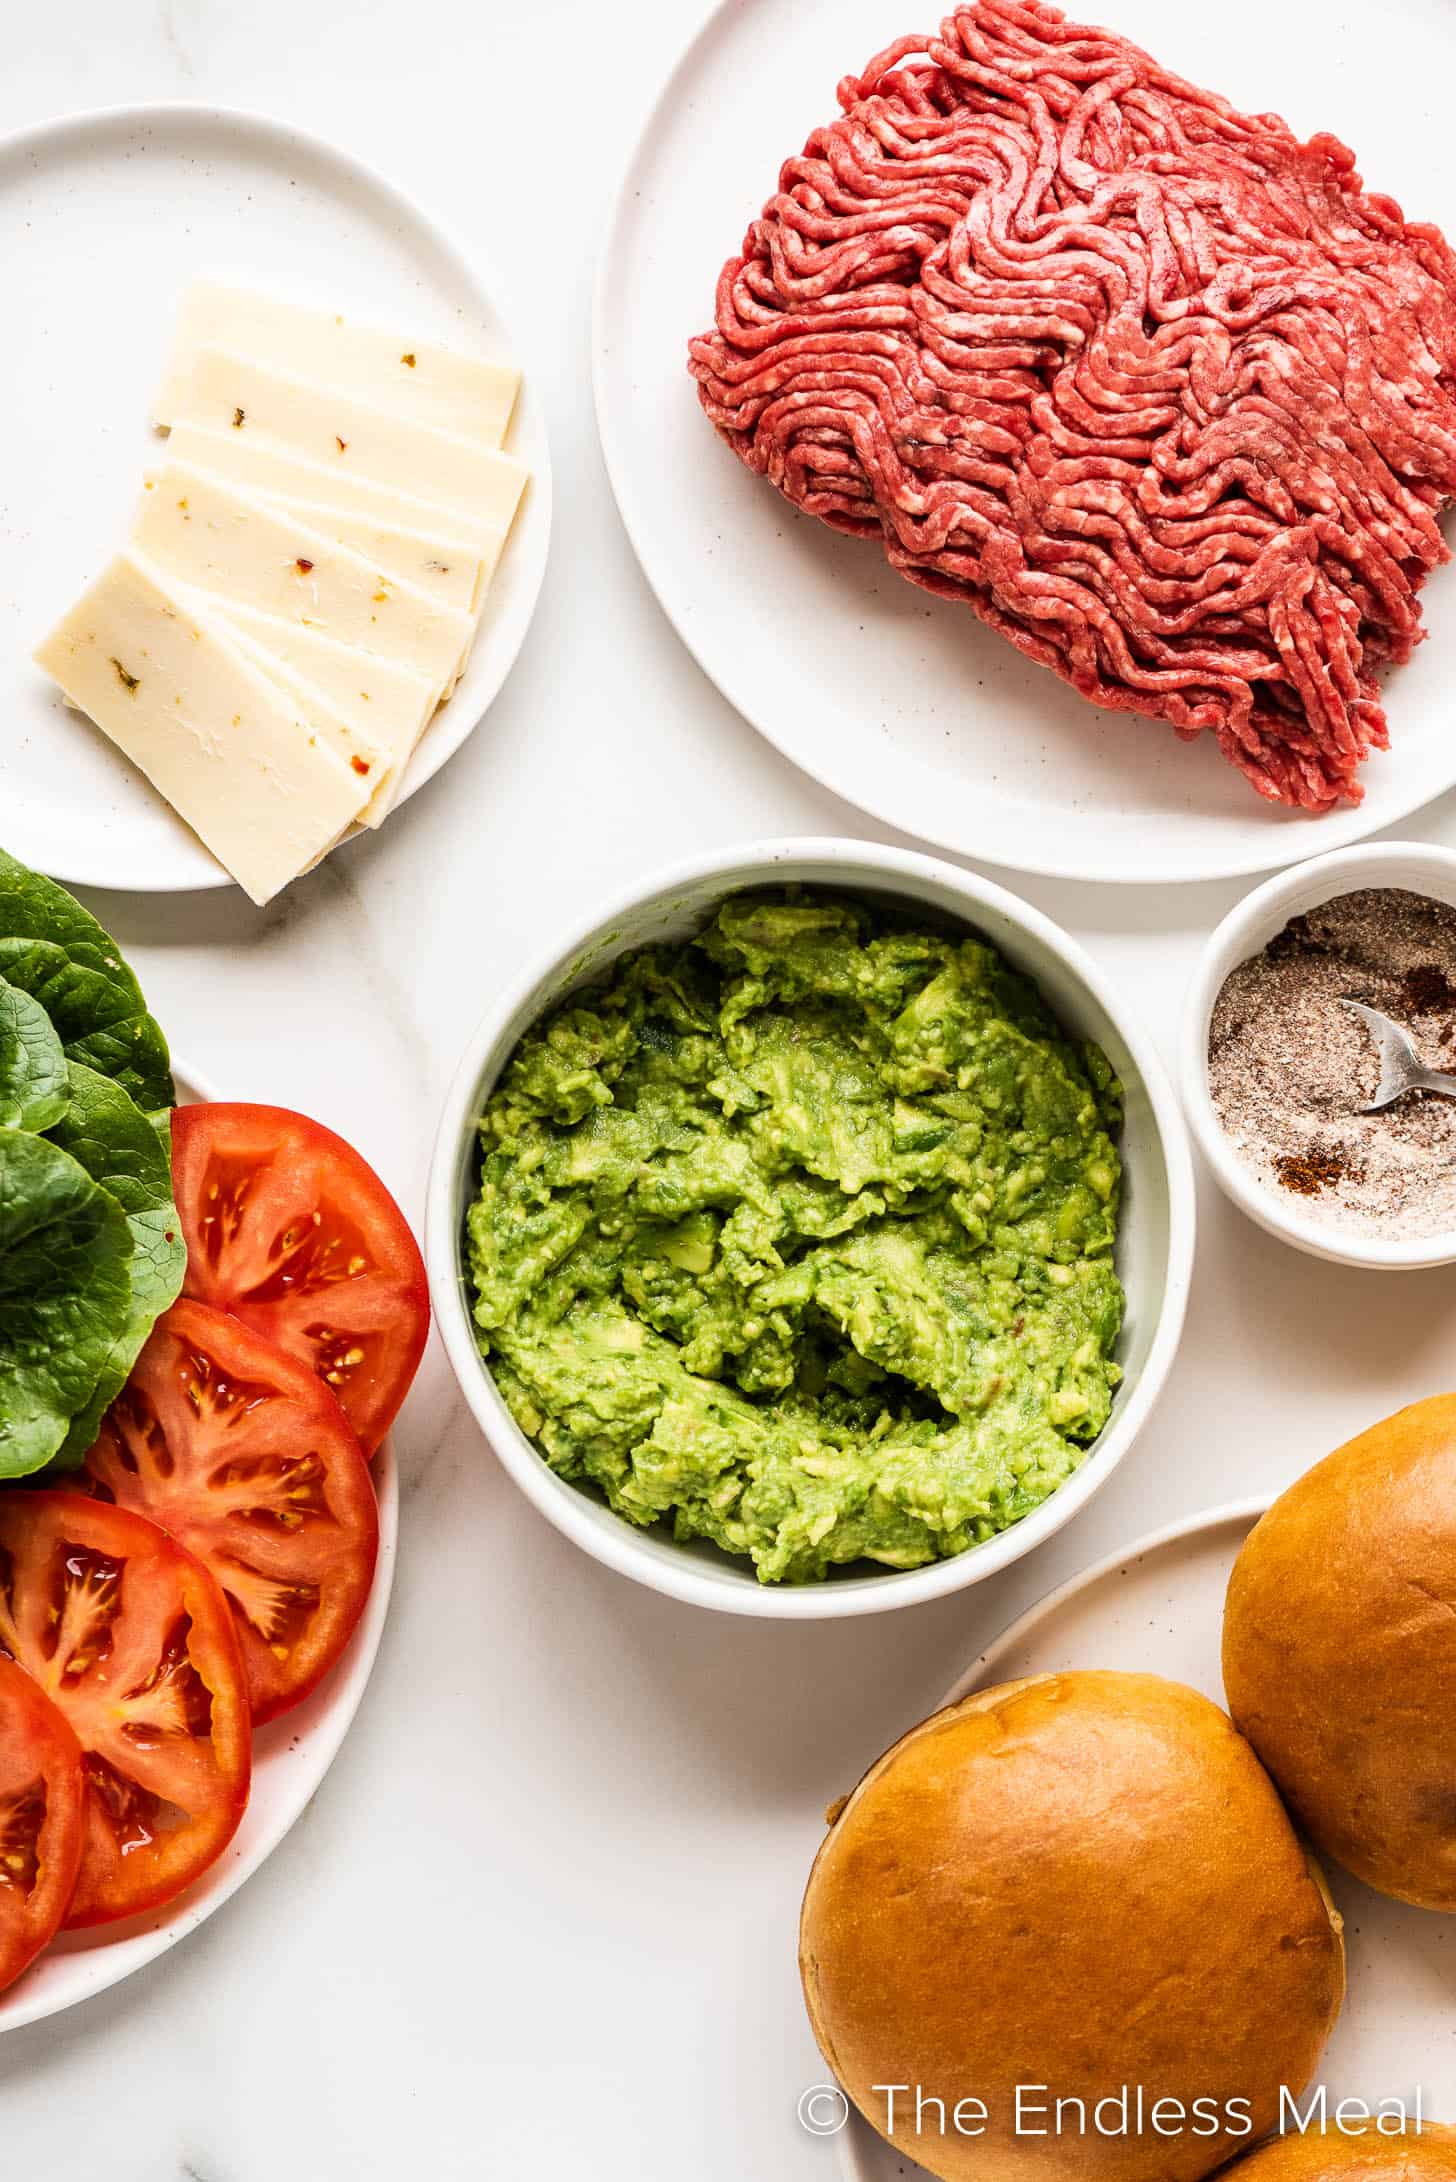 all the ingredients needed to make a burger with guacamole